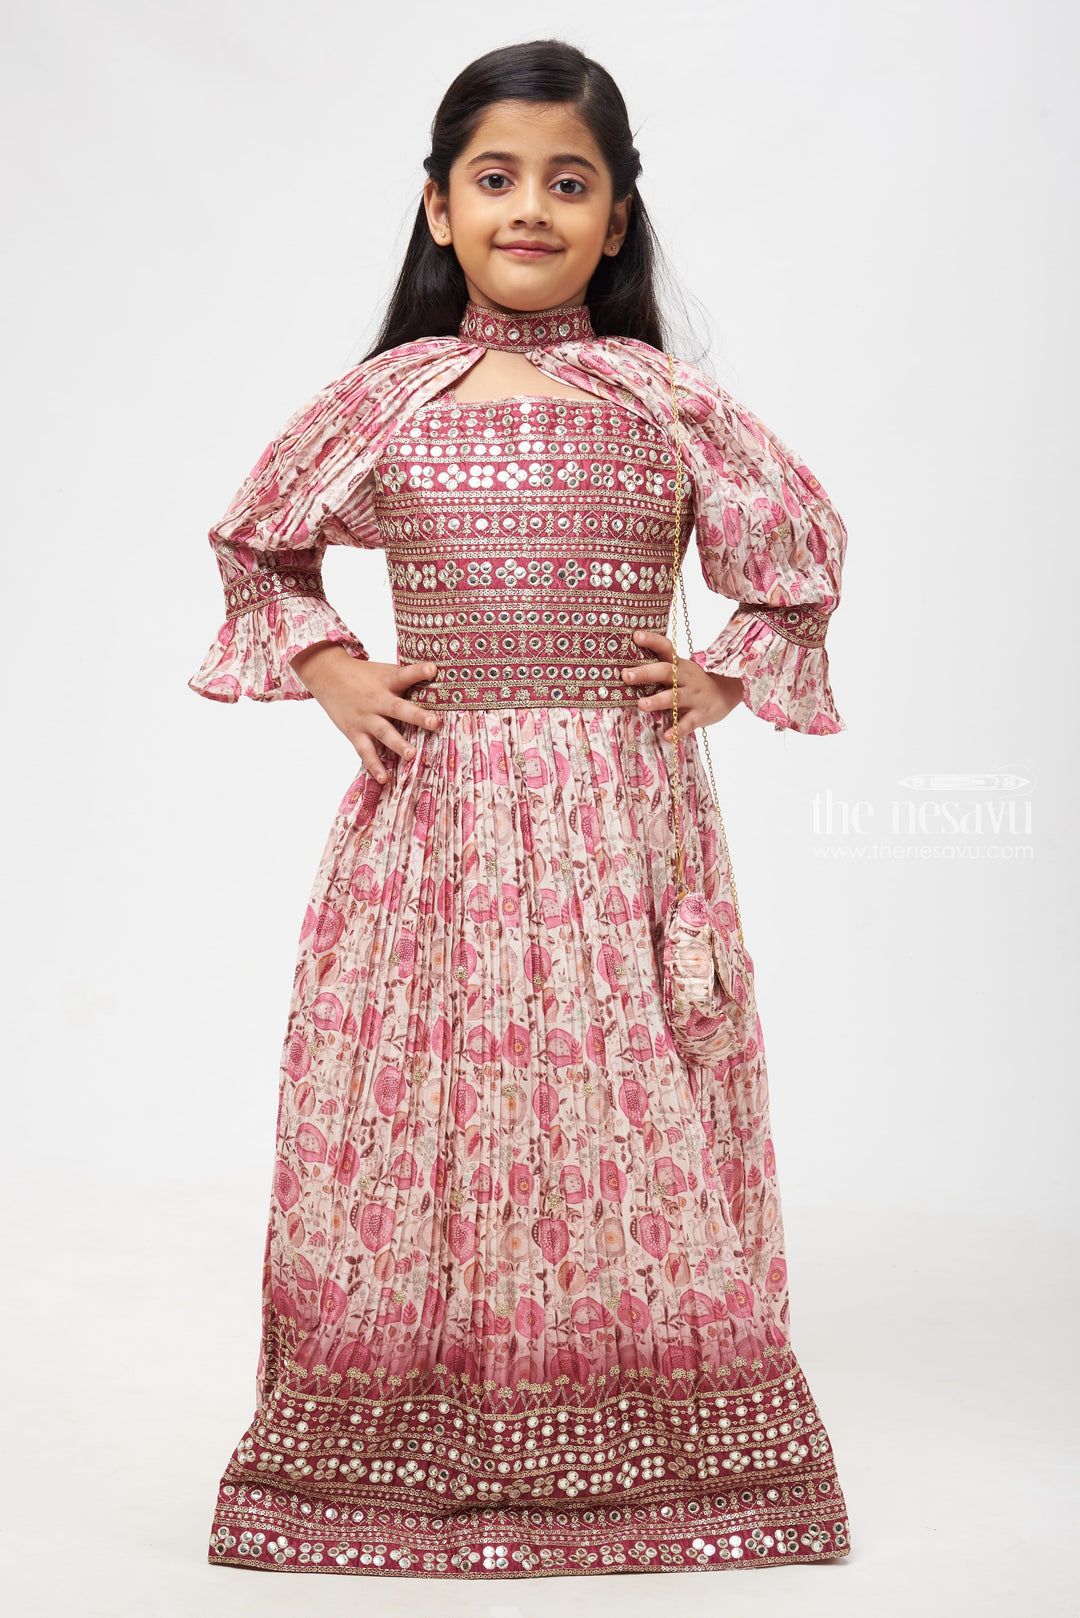 The Nesavu Girls Party Gown Majestic Paisley Diwali Anarkali Gown with Enchanting Bohemian Details for Girls Nesavu 24 (5Y) / Pink / Georgette GA174A-24 Bohemian Floral Anarkali Gown | Diwali Festive Girls Wear Collection | The Nesavu